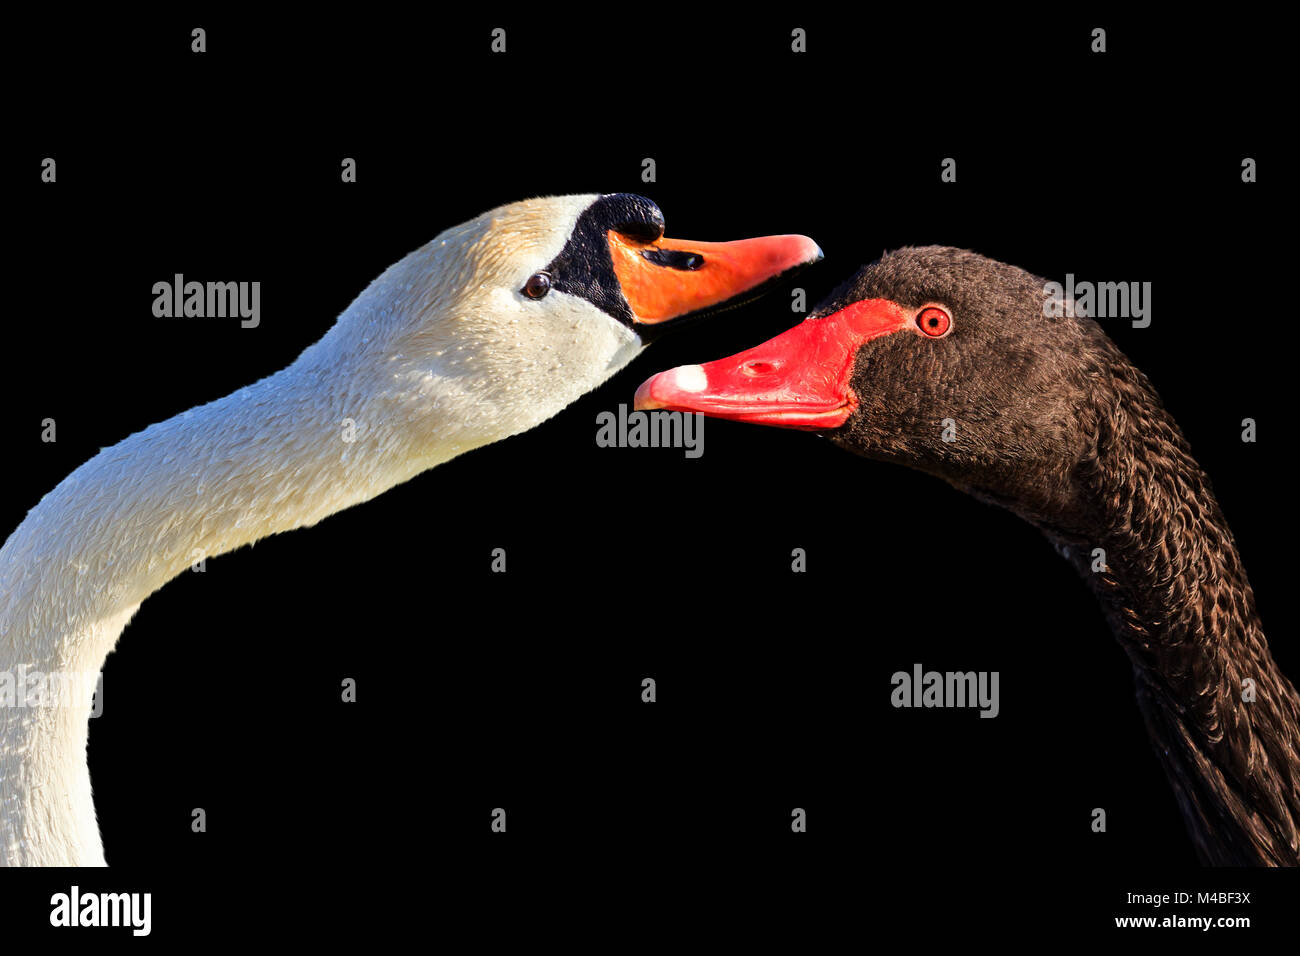 White and black swans are isolated on a black background Stock Photo